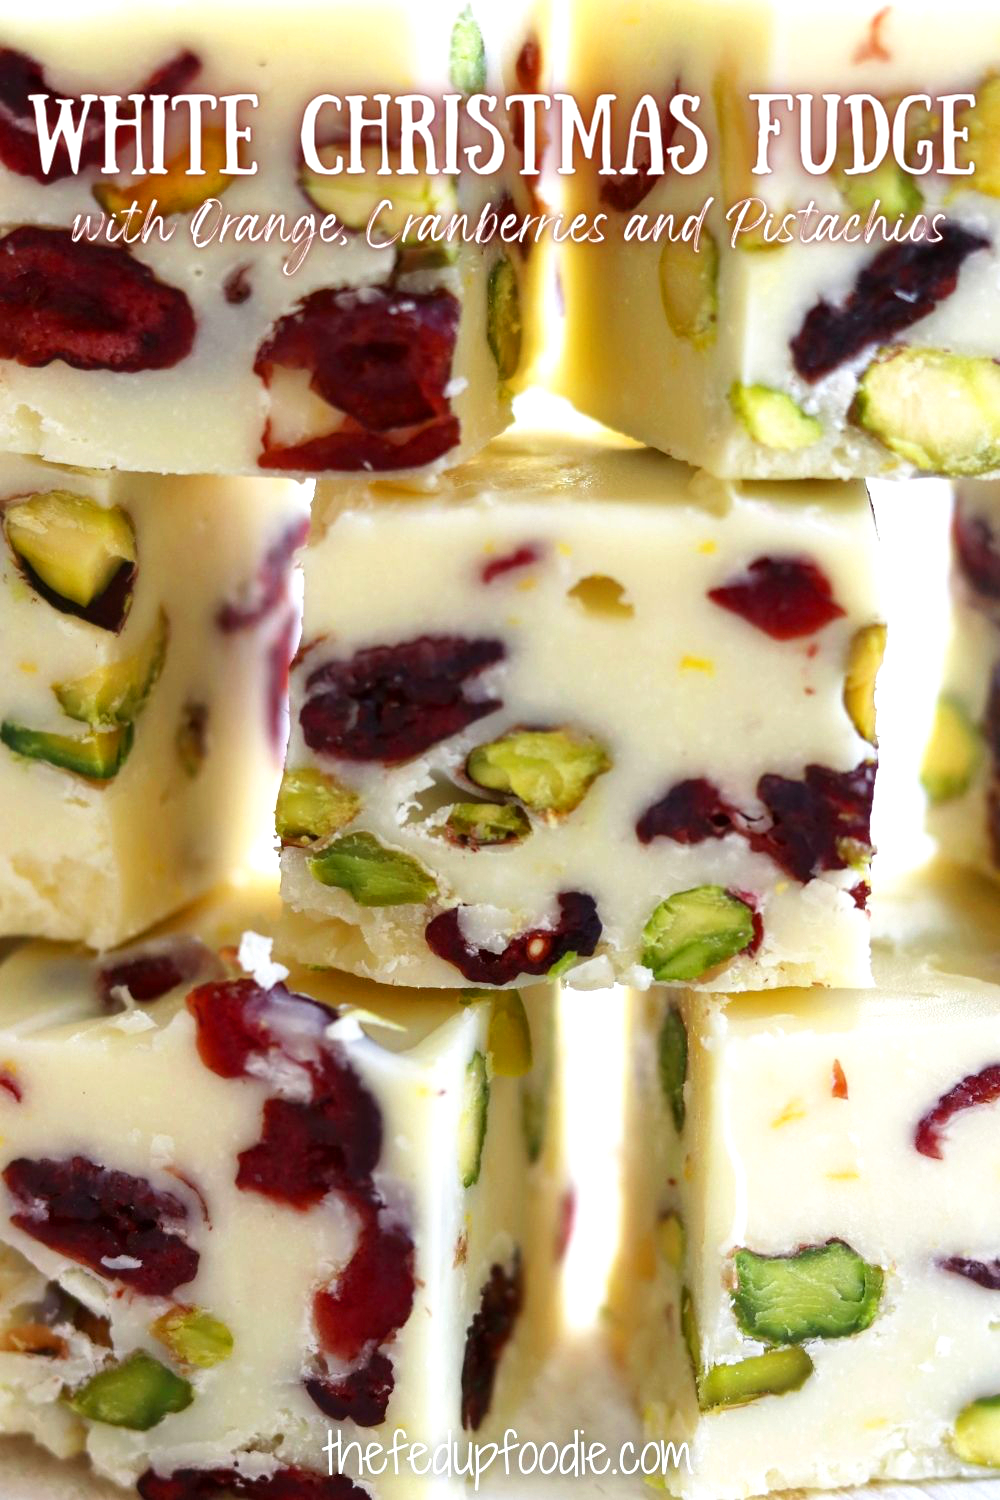 White Christmas Fudge is not only incredibly easy to make, it is also a beautiful addittion to your holiday table. Made with creamy white chocolate, chewy dried cranberries and buttery pistachios. Additionally, this fudge is kissed with the bright citrus flavor of orange. It a mildly sweet and festive treat that also makes a beautiful homemade gift. #WhiteFudge #WhiteFudgeRecipeEasy #WhiteChocolateFudge #WhiteChocolateFudgeCondensedMilk #WhiteChristmasFudge